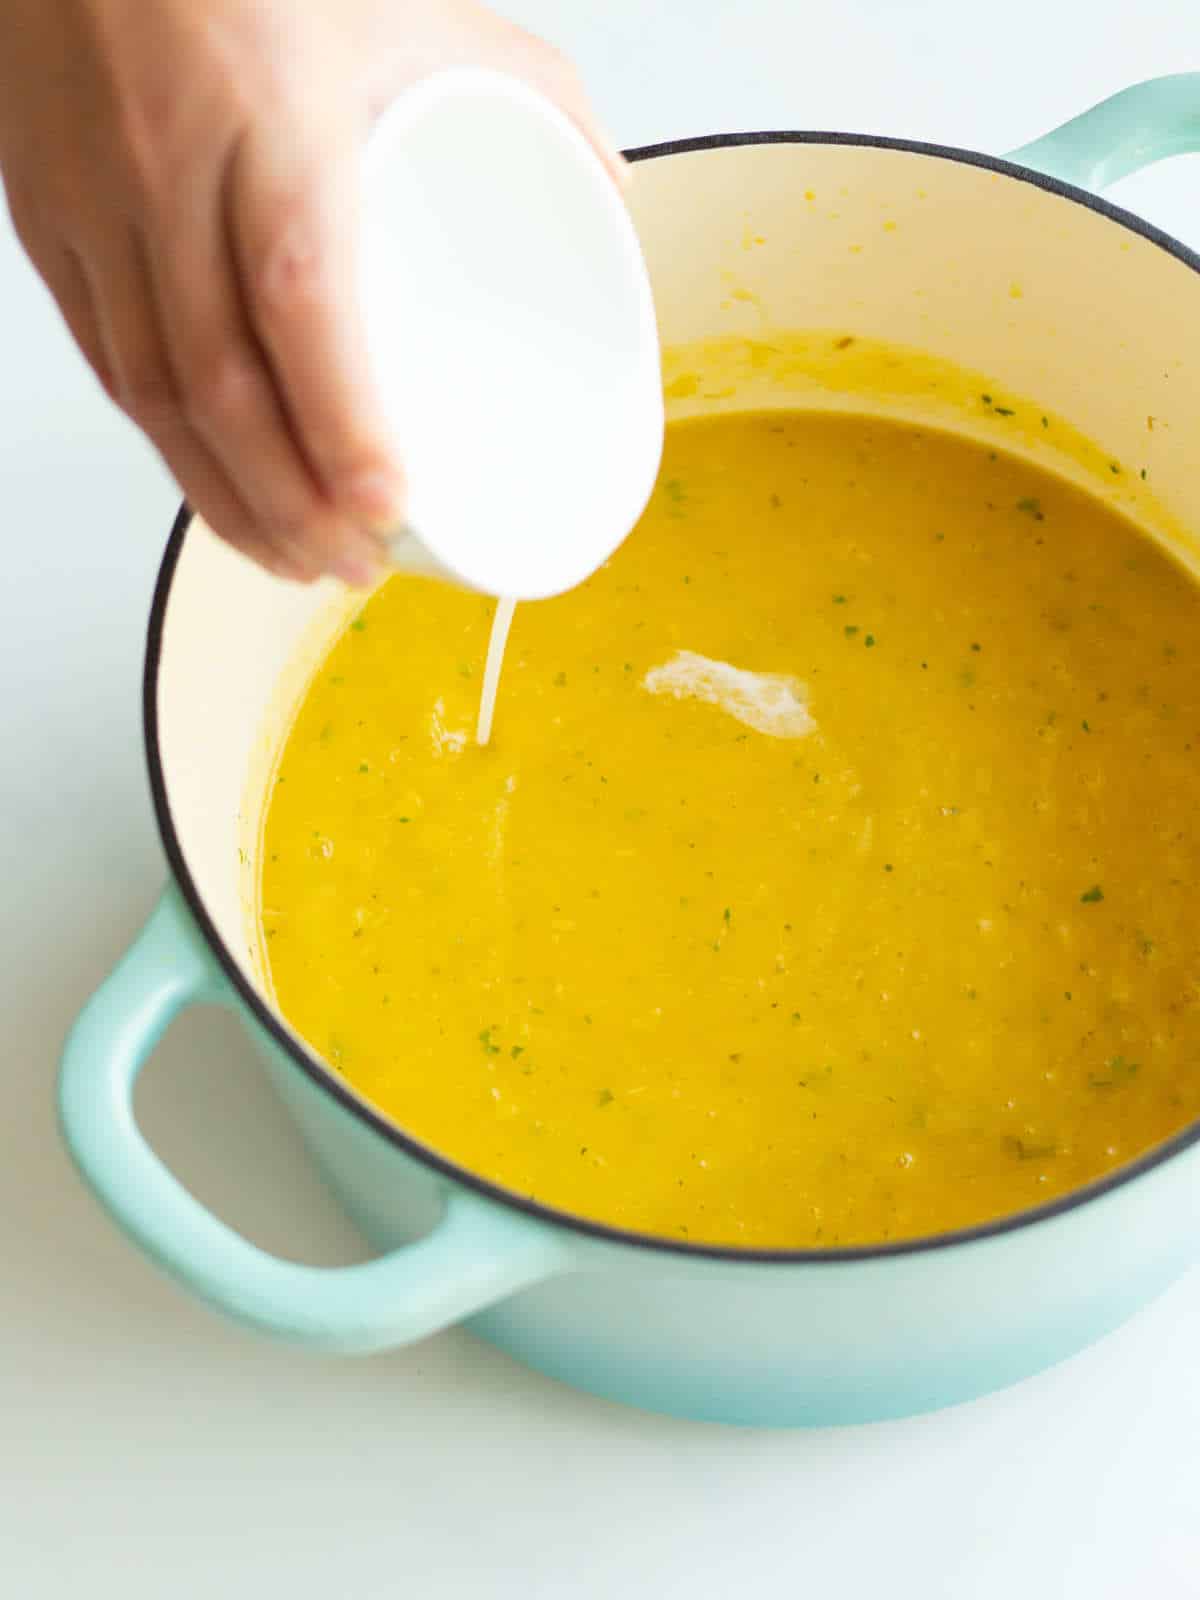 cream added to soup pot of creamy butternut squash soup.